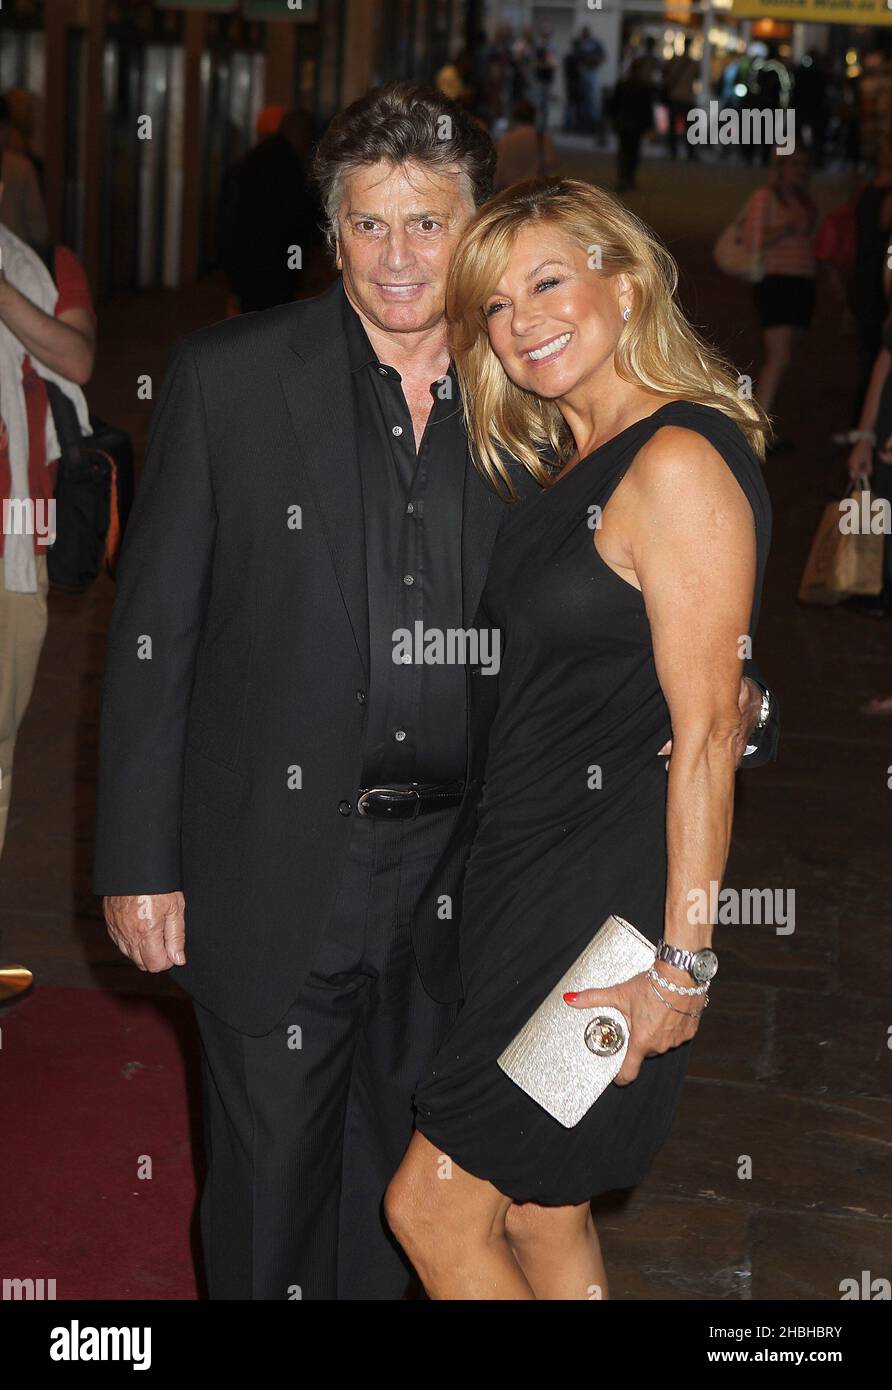 Jilly Johnson attends Wag! The Musical - press night at the Charing Cross Theatre in London. Stock Photo